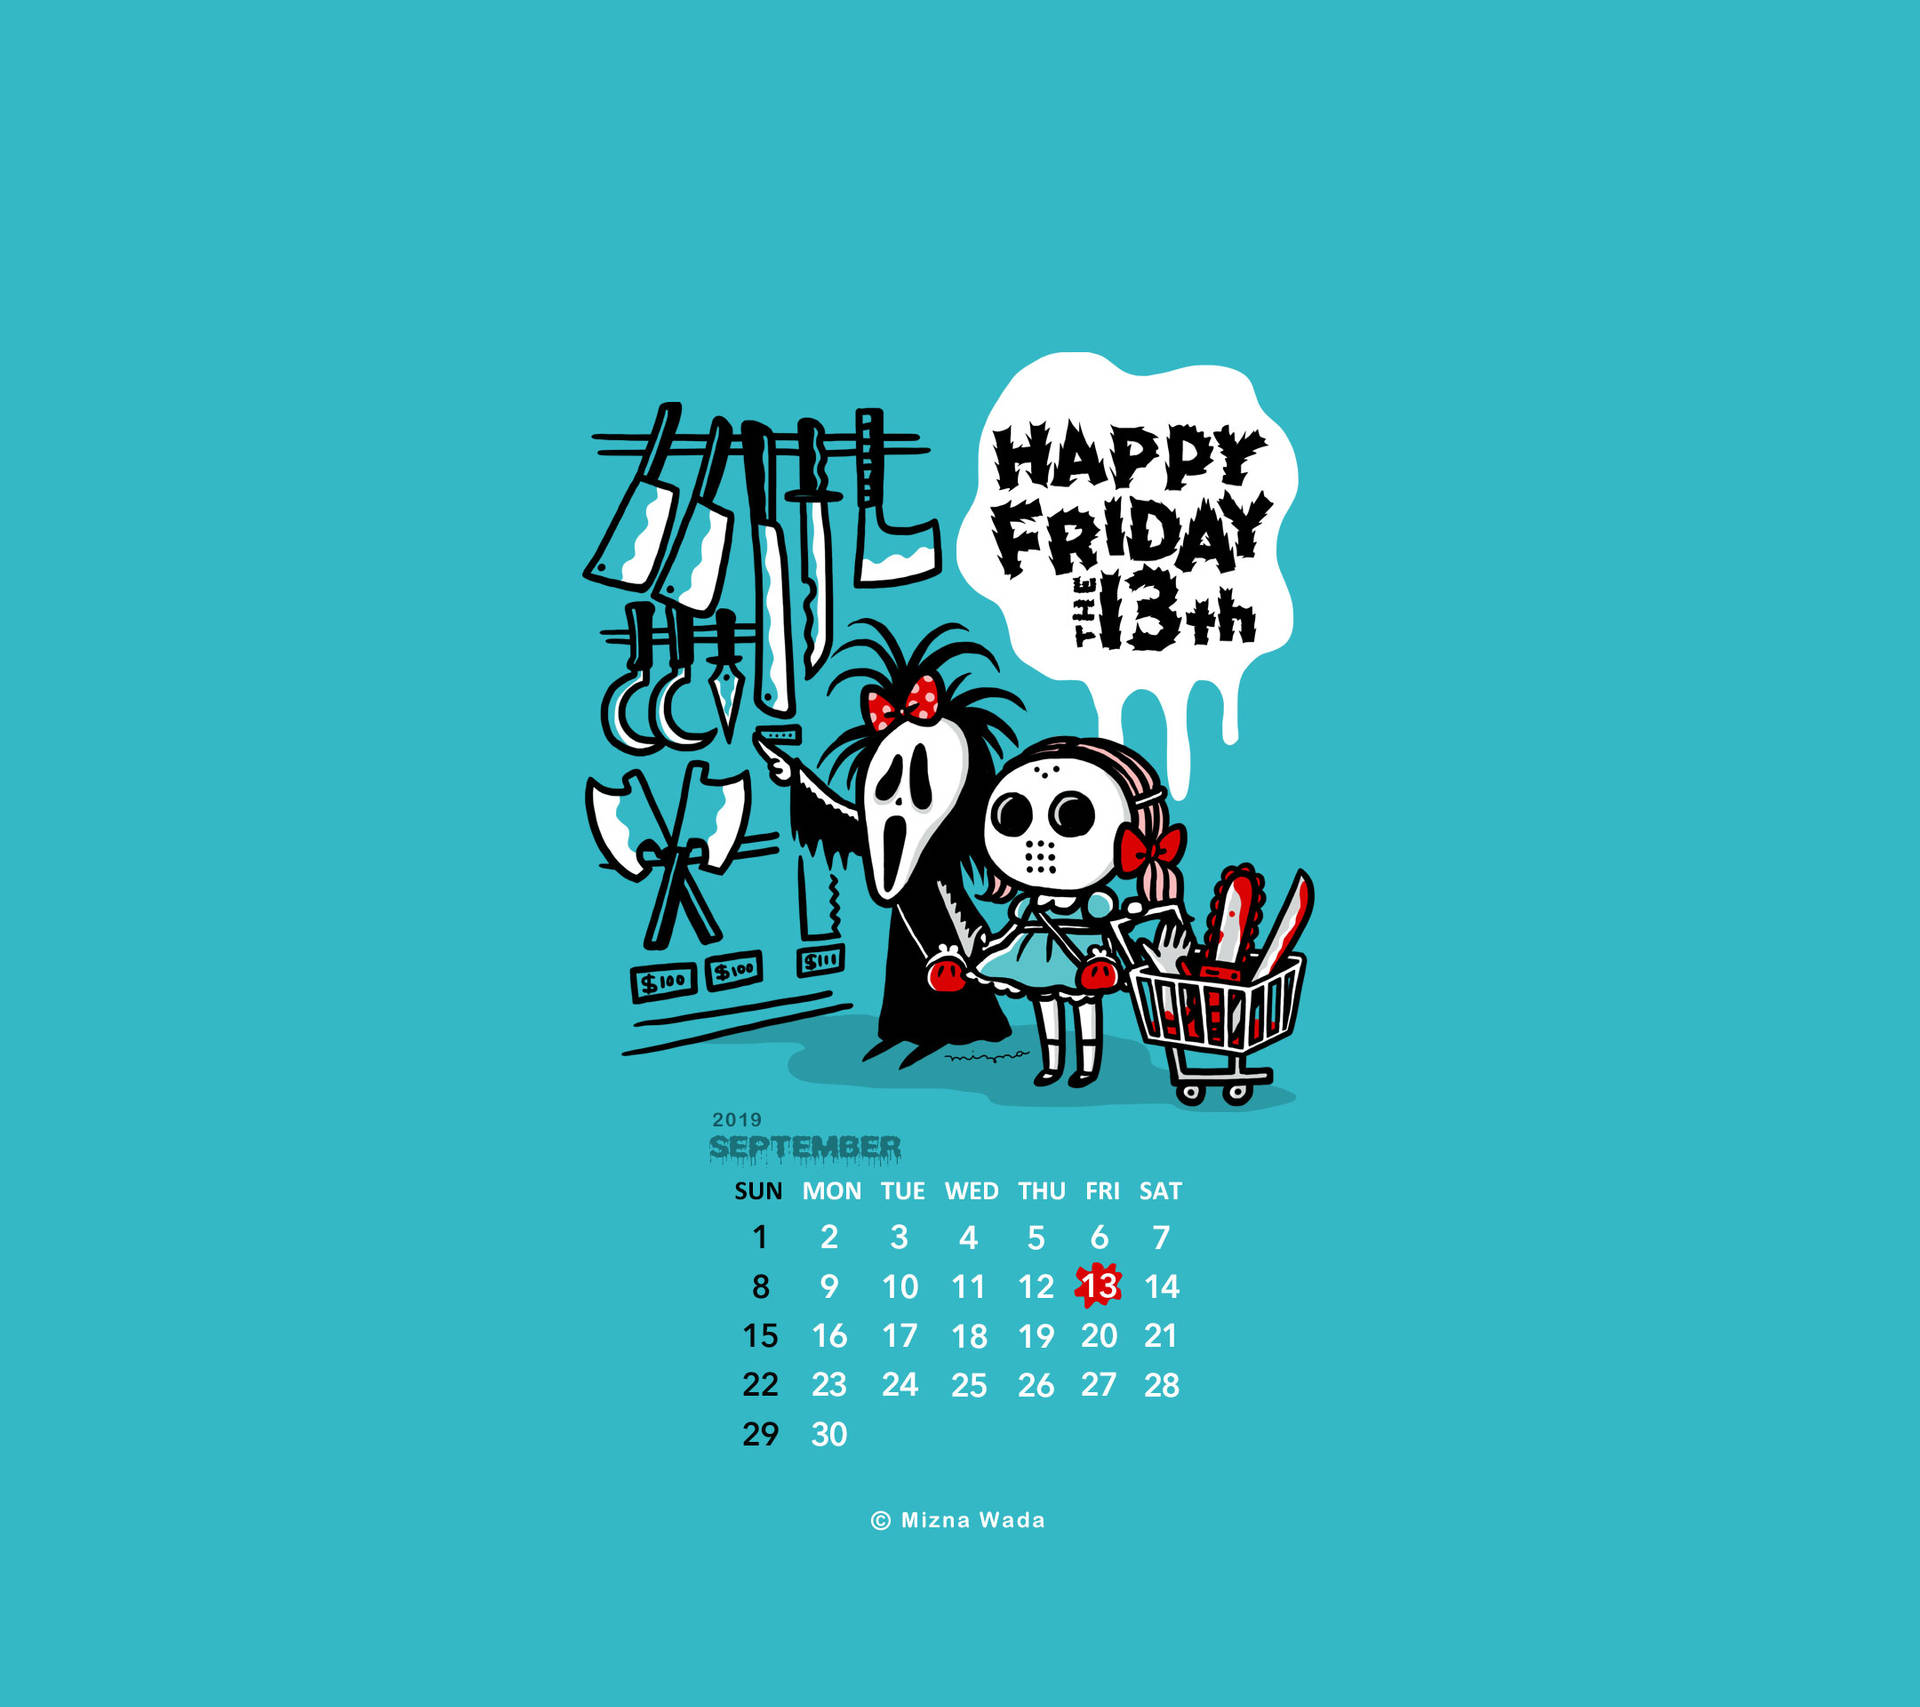 Happy Friday The 13th Wallpaper